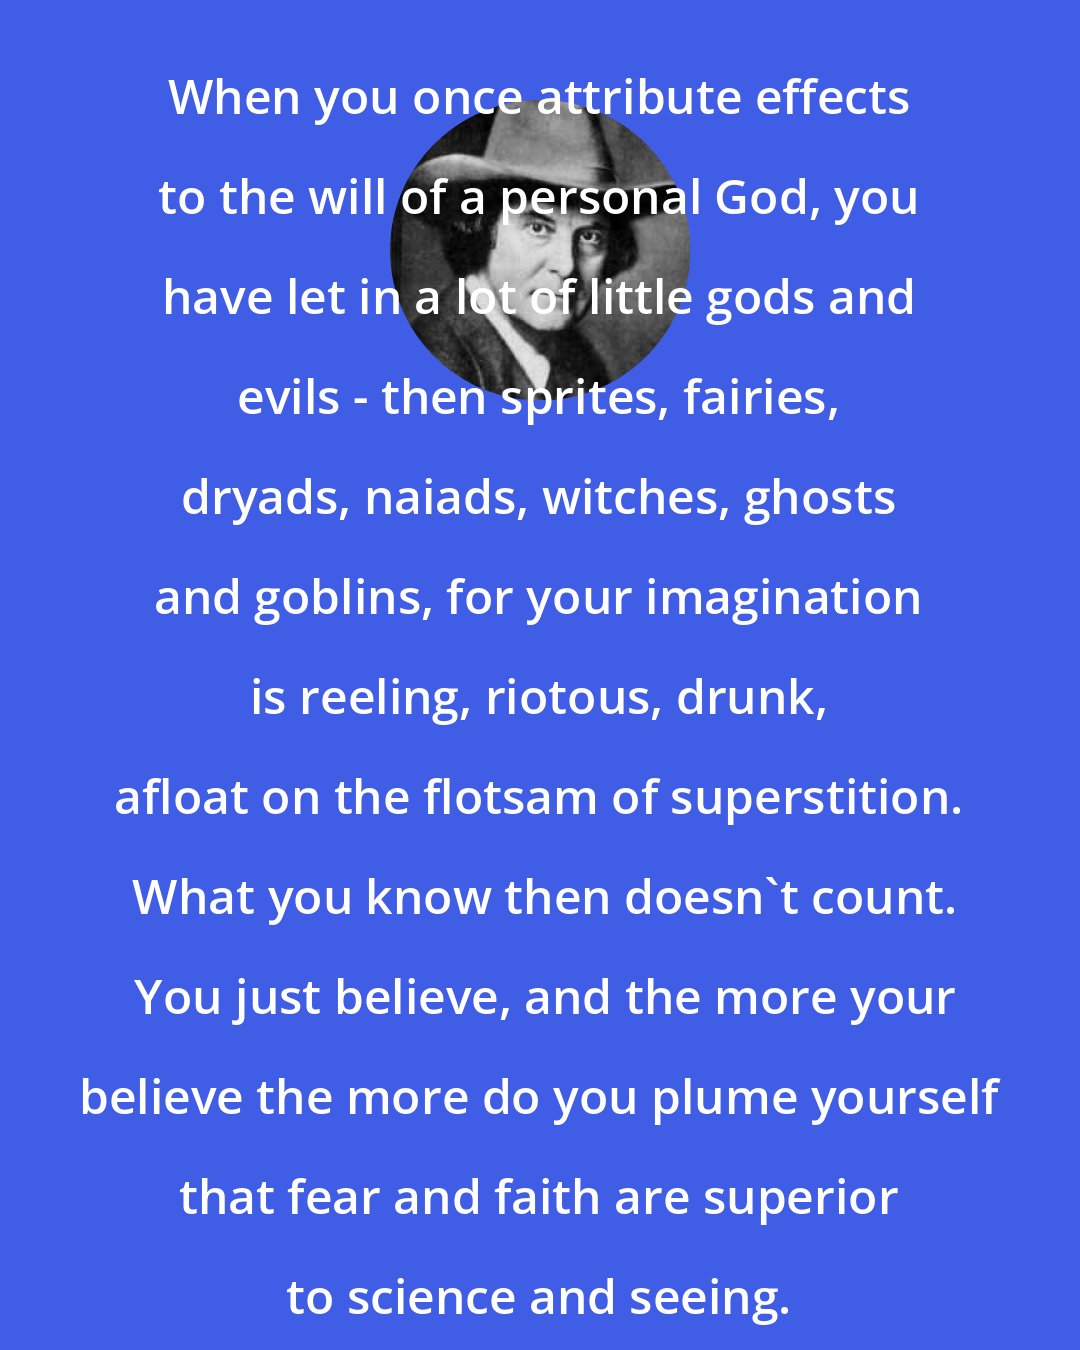 Elbert Hubbard: When you once attribute effects to the will of a personal God, you have let in a lot of little gods and evils - then sprites, fairies, dryads, naiads, witches, ghosts and goblins, for your imagination is reeling, riotous, drunk, afloat on the flotsam of superstition.  What you know then doesn't count.  You just believe, and the more your believe the more do you plume yourself that fear and faith are superior to science and seeing.